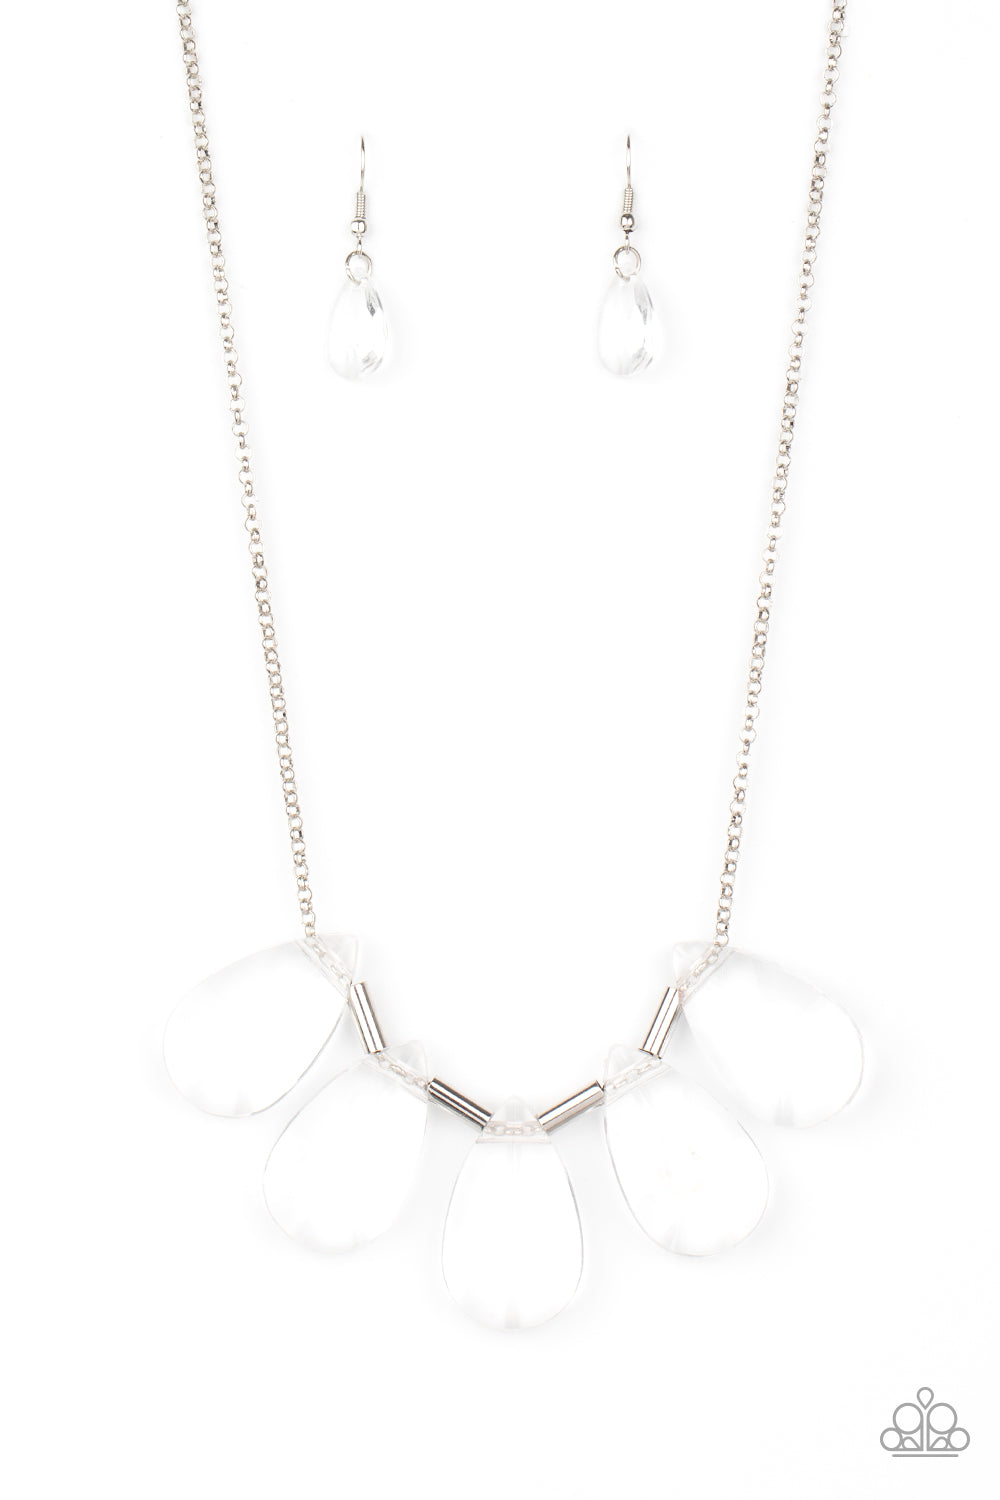 HEIR It Our - white - Paparazzi necklace